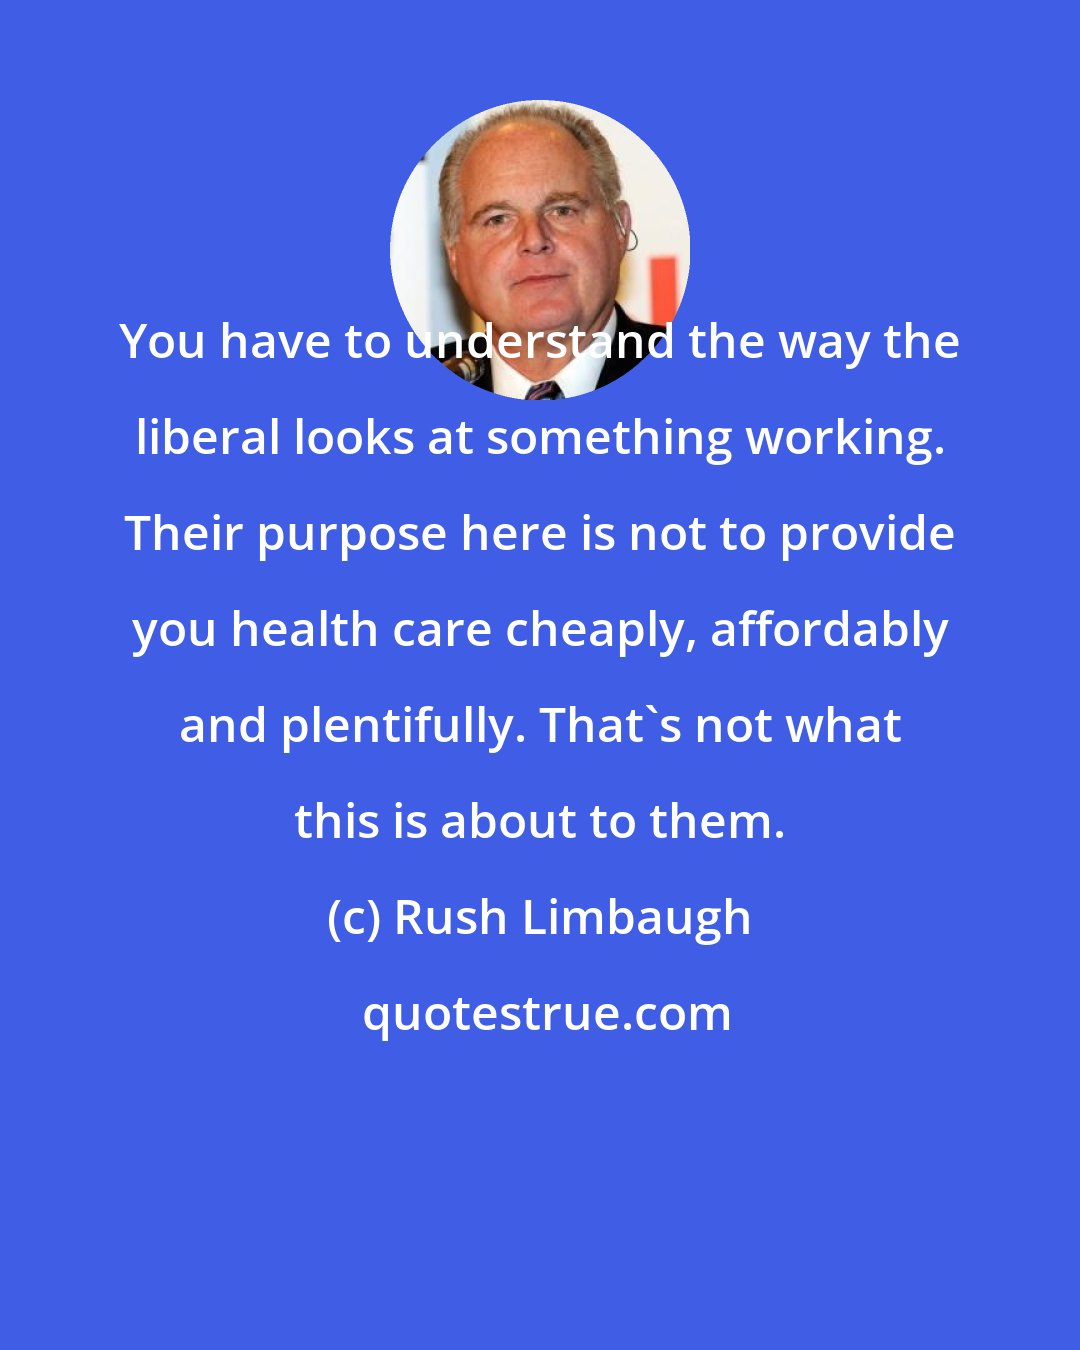 Rush Limbaugh: You have to understand the way the liberal looks at something working. Their purpose here is not to provide you health care cheaply, affordably and plentifully. That's not what this is about to them.